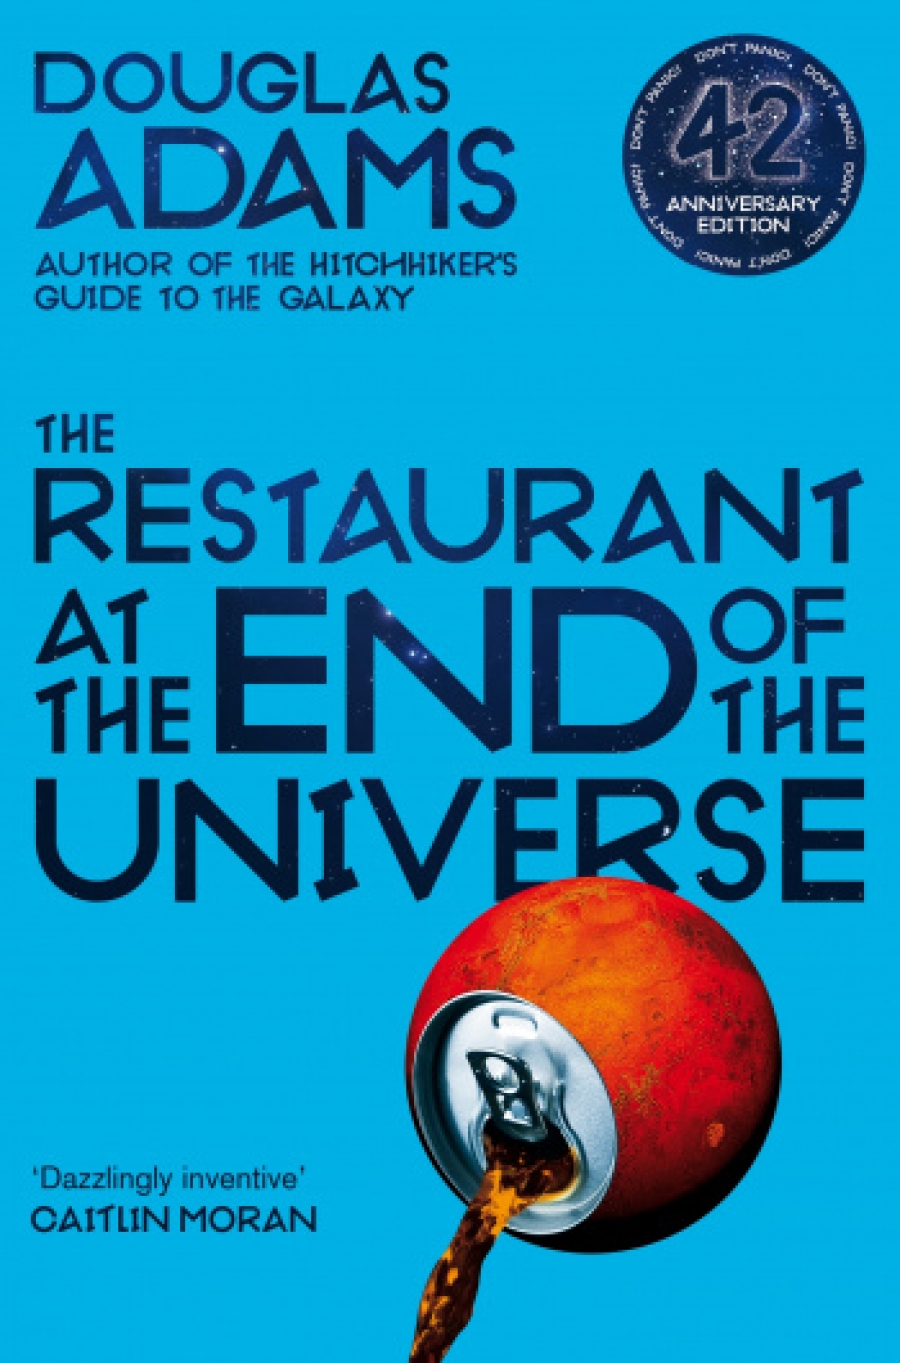 Douglas Adams The Restaurant at the End of the Universe 